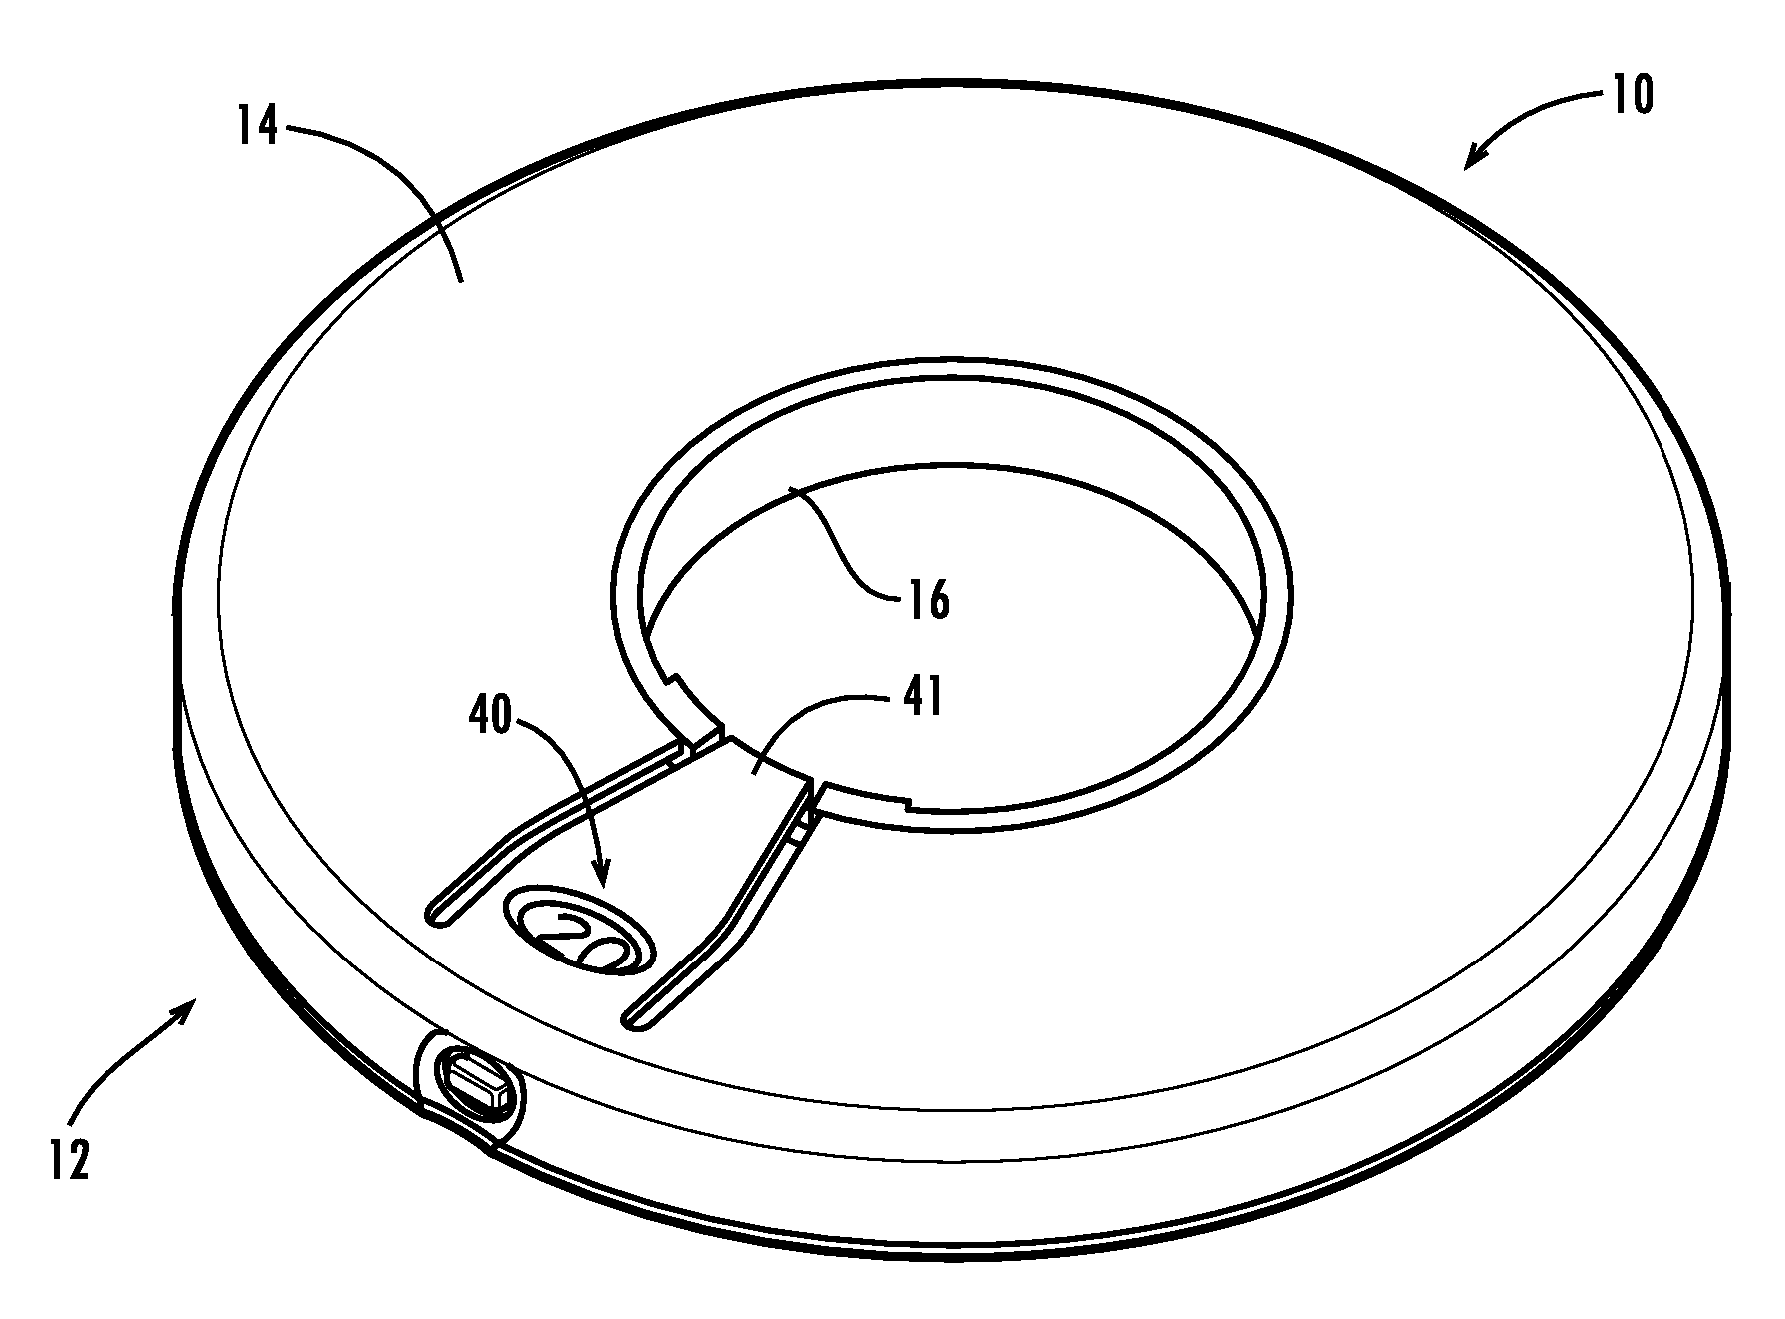 Cap displacement mechanism for lancing device and multi-lancet cartridge